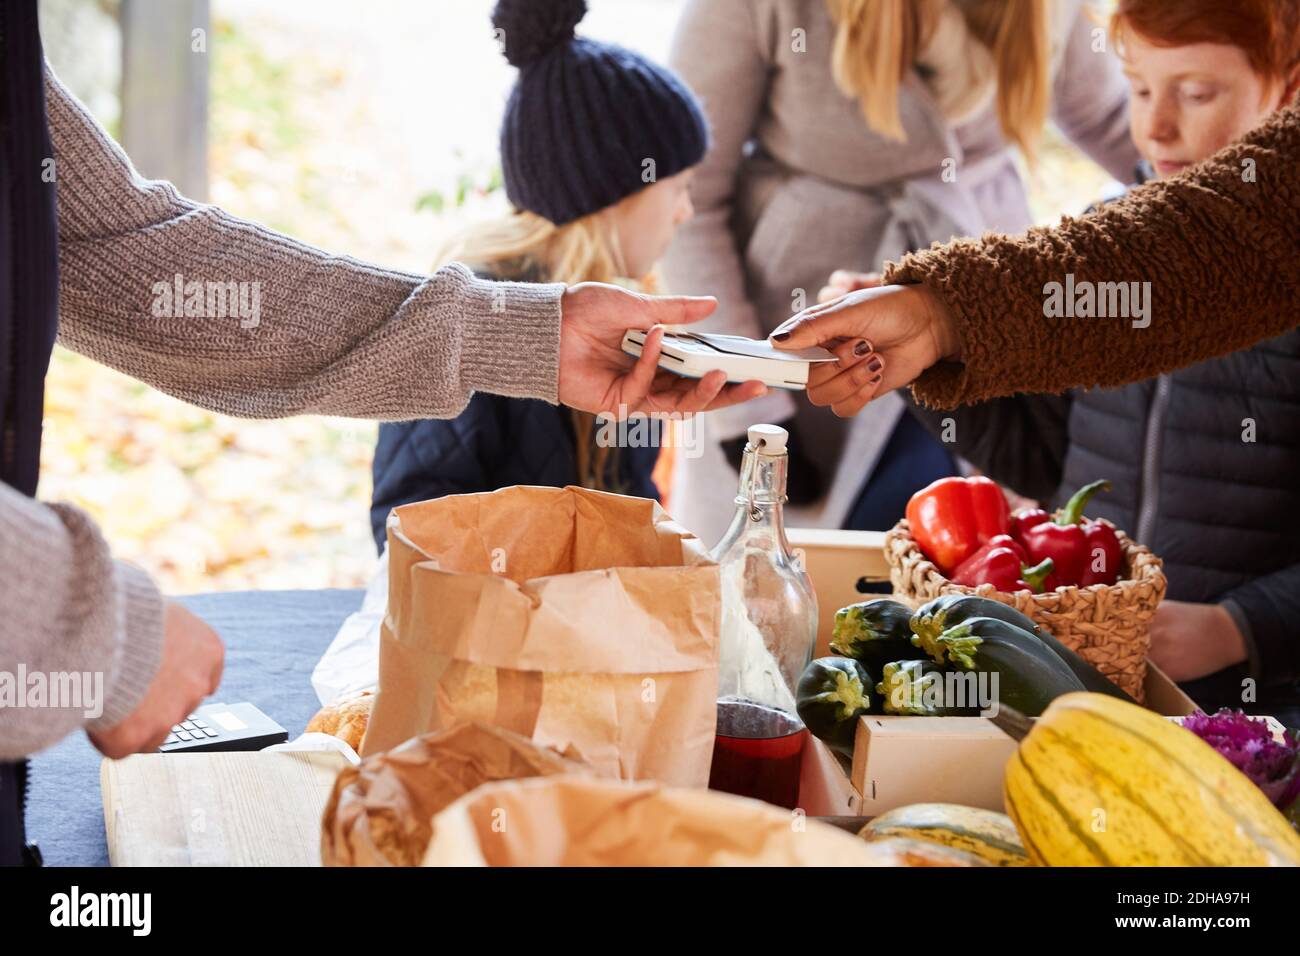 Woman paying through credit card to male vendor at market stall Stock Photo